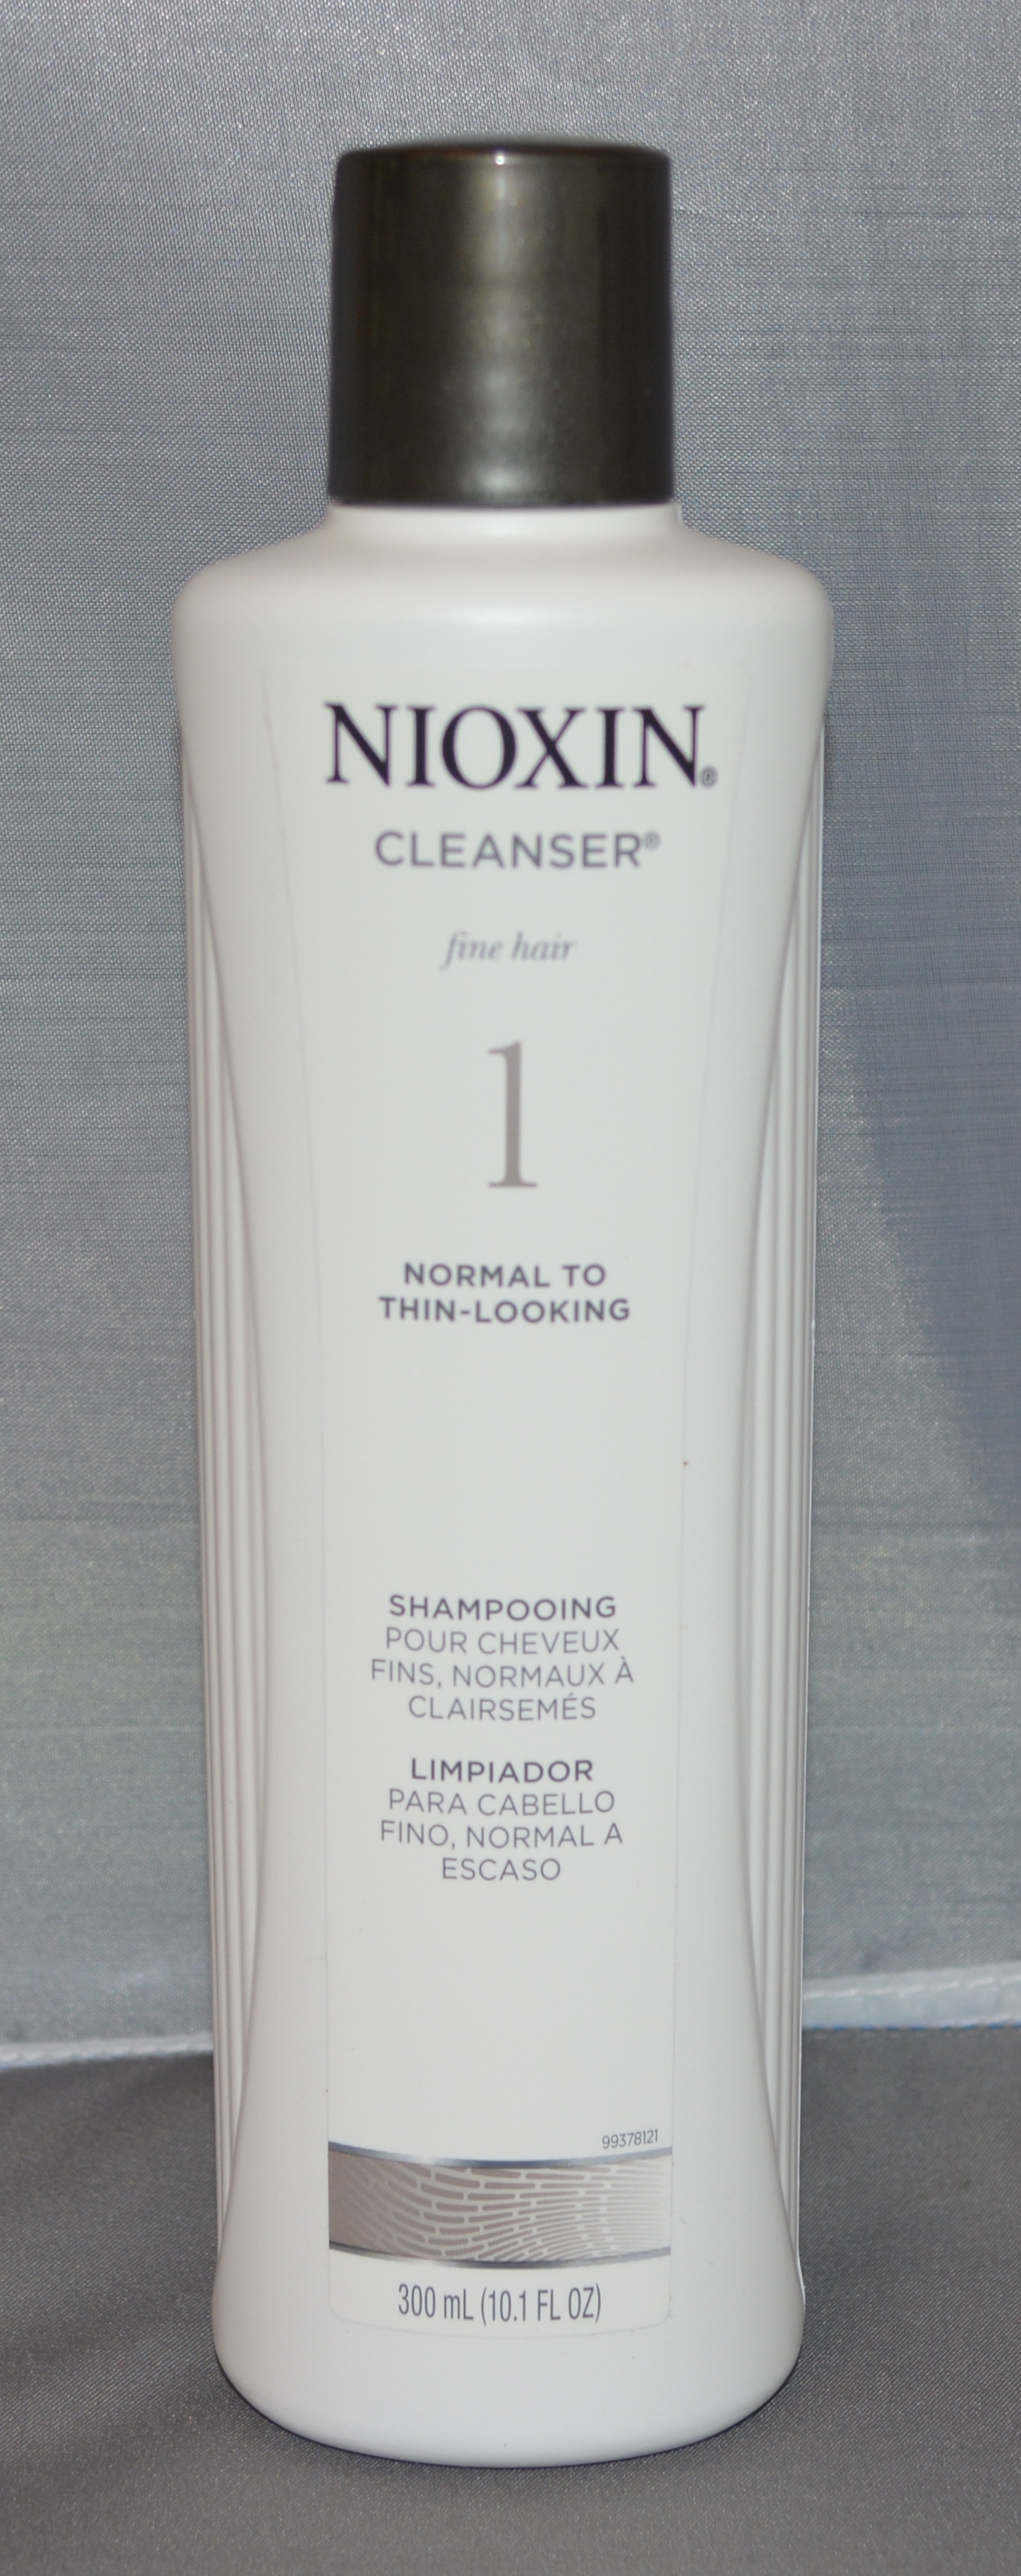 Nioxin Cleanser System 1 Fine/Normal to Thin-Looking Hair 10.1 oz